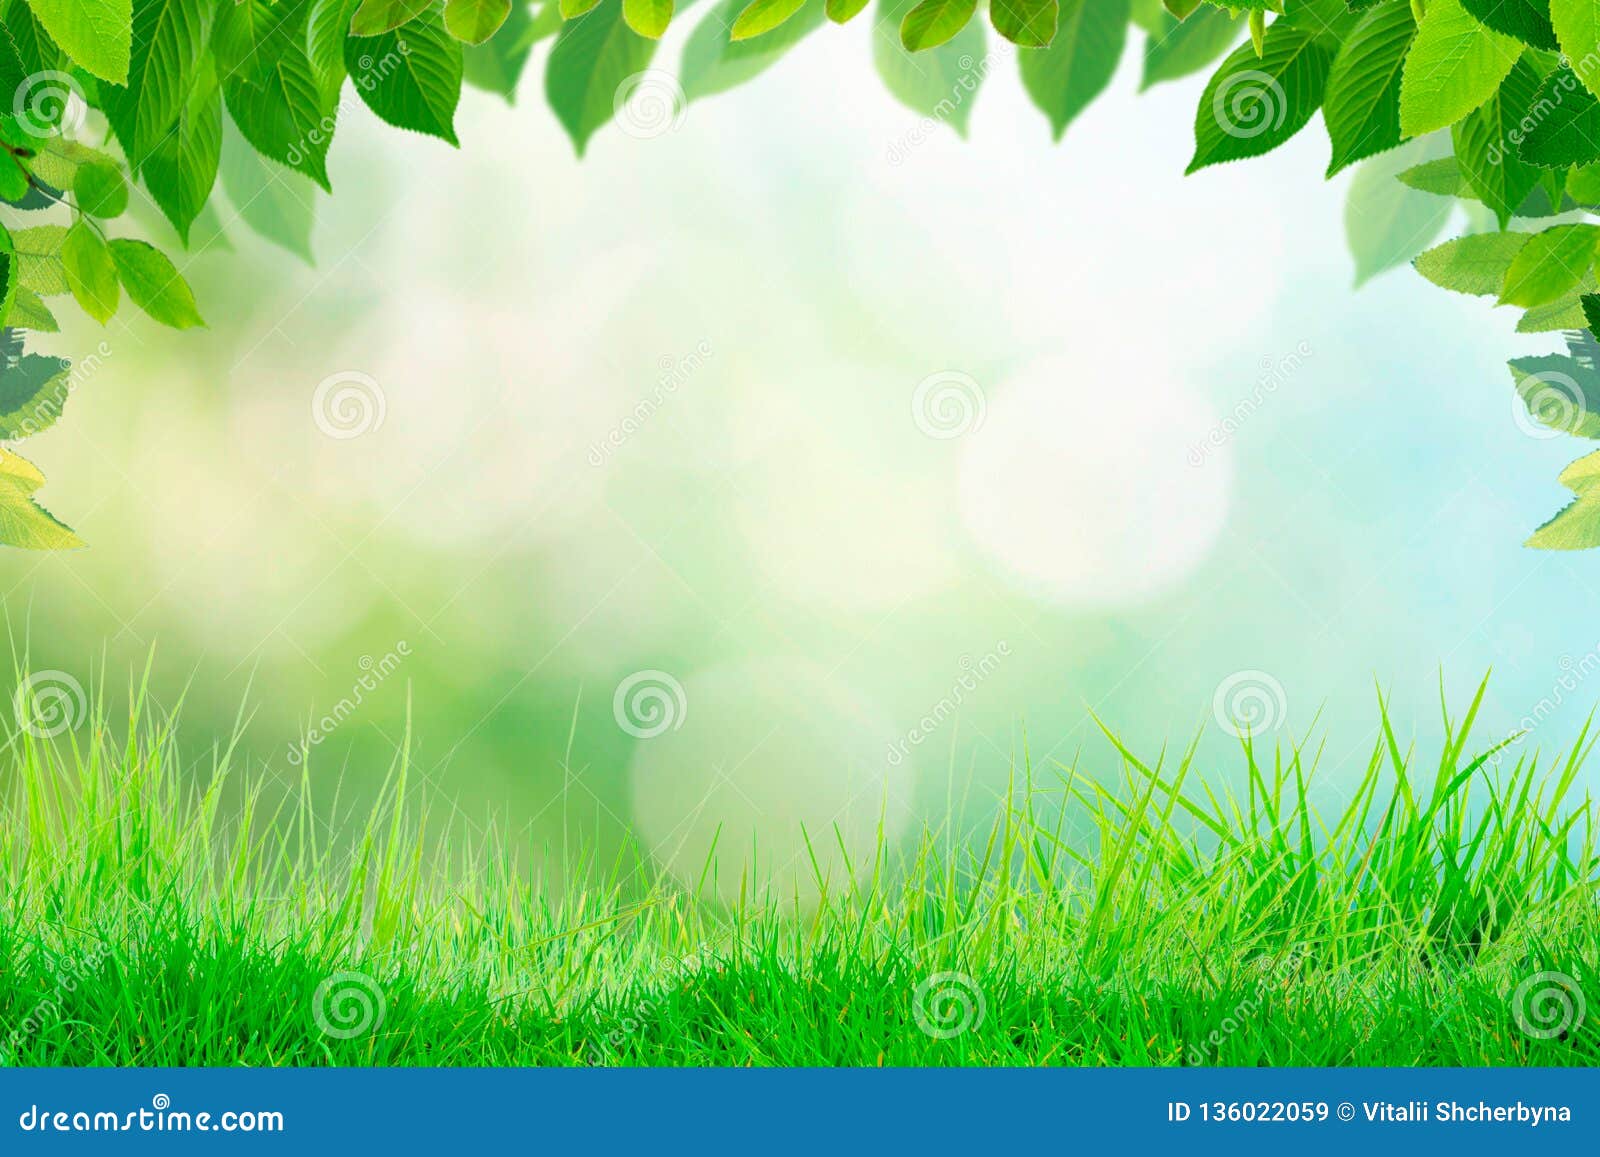 Empty Grass Top with Blur Park Green Nature Background Bokeh Light,Mock Up  for Display or Montage of Product,Banner or Header for Stock Image - Image  of table, blurred: 136022059